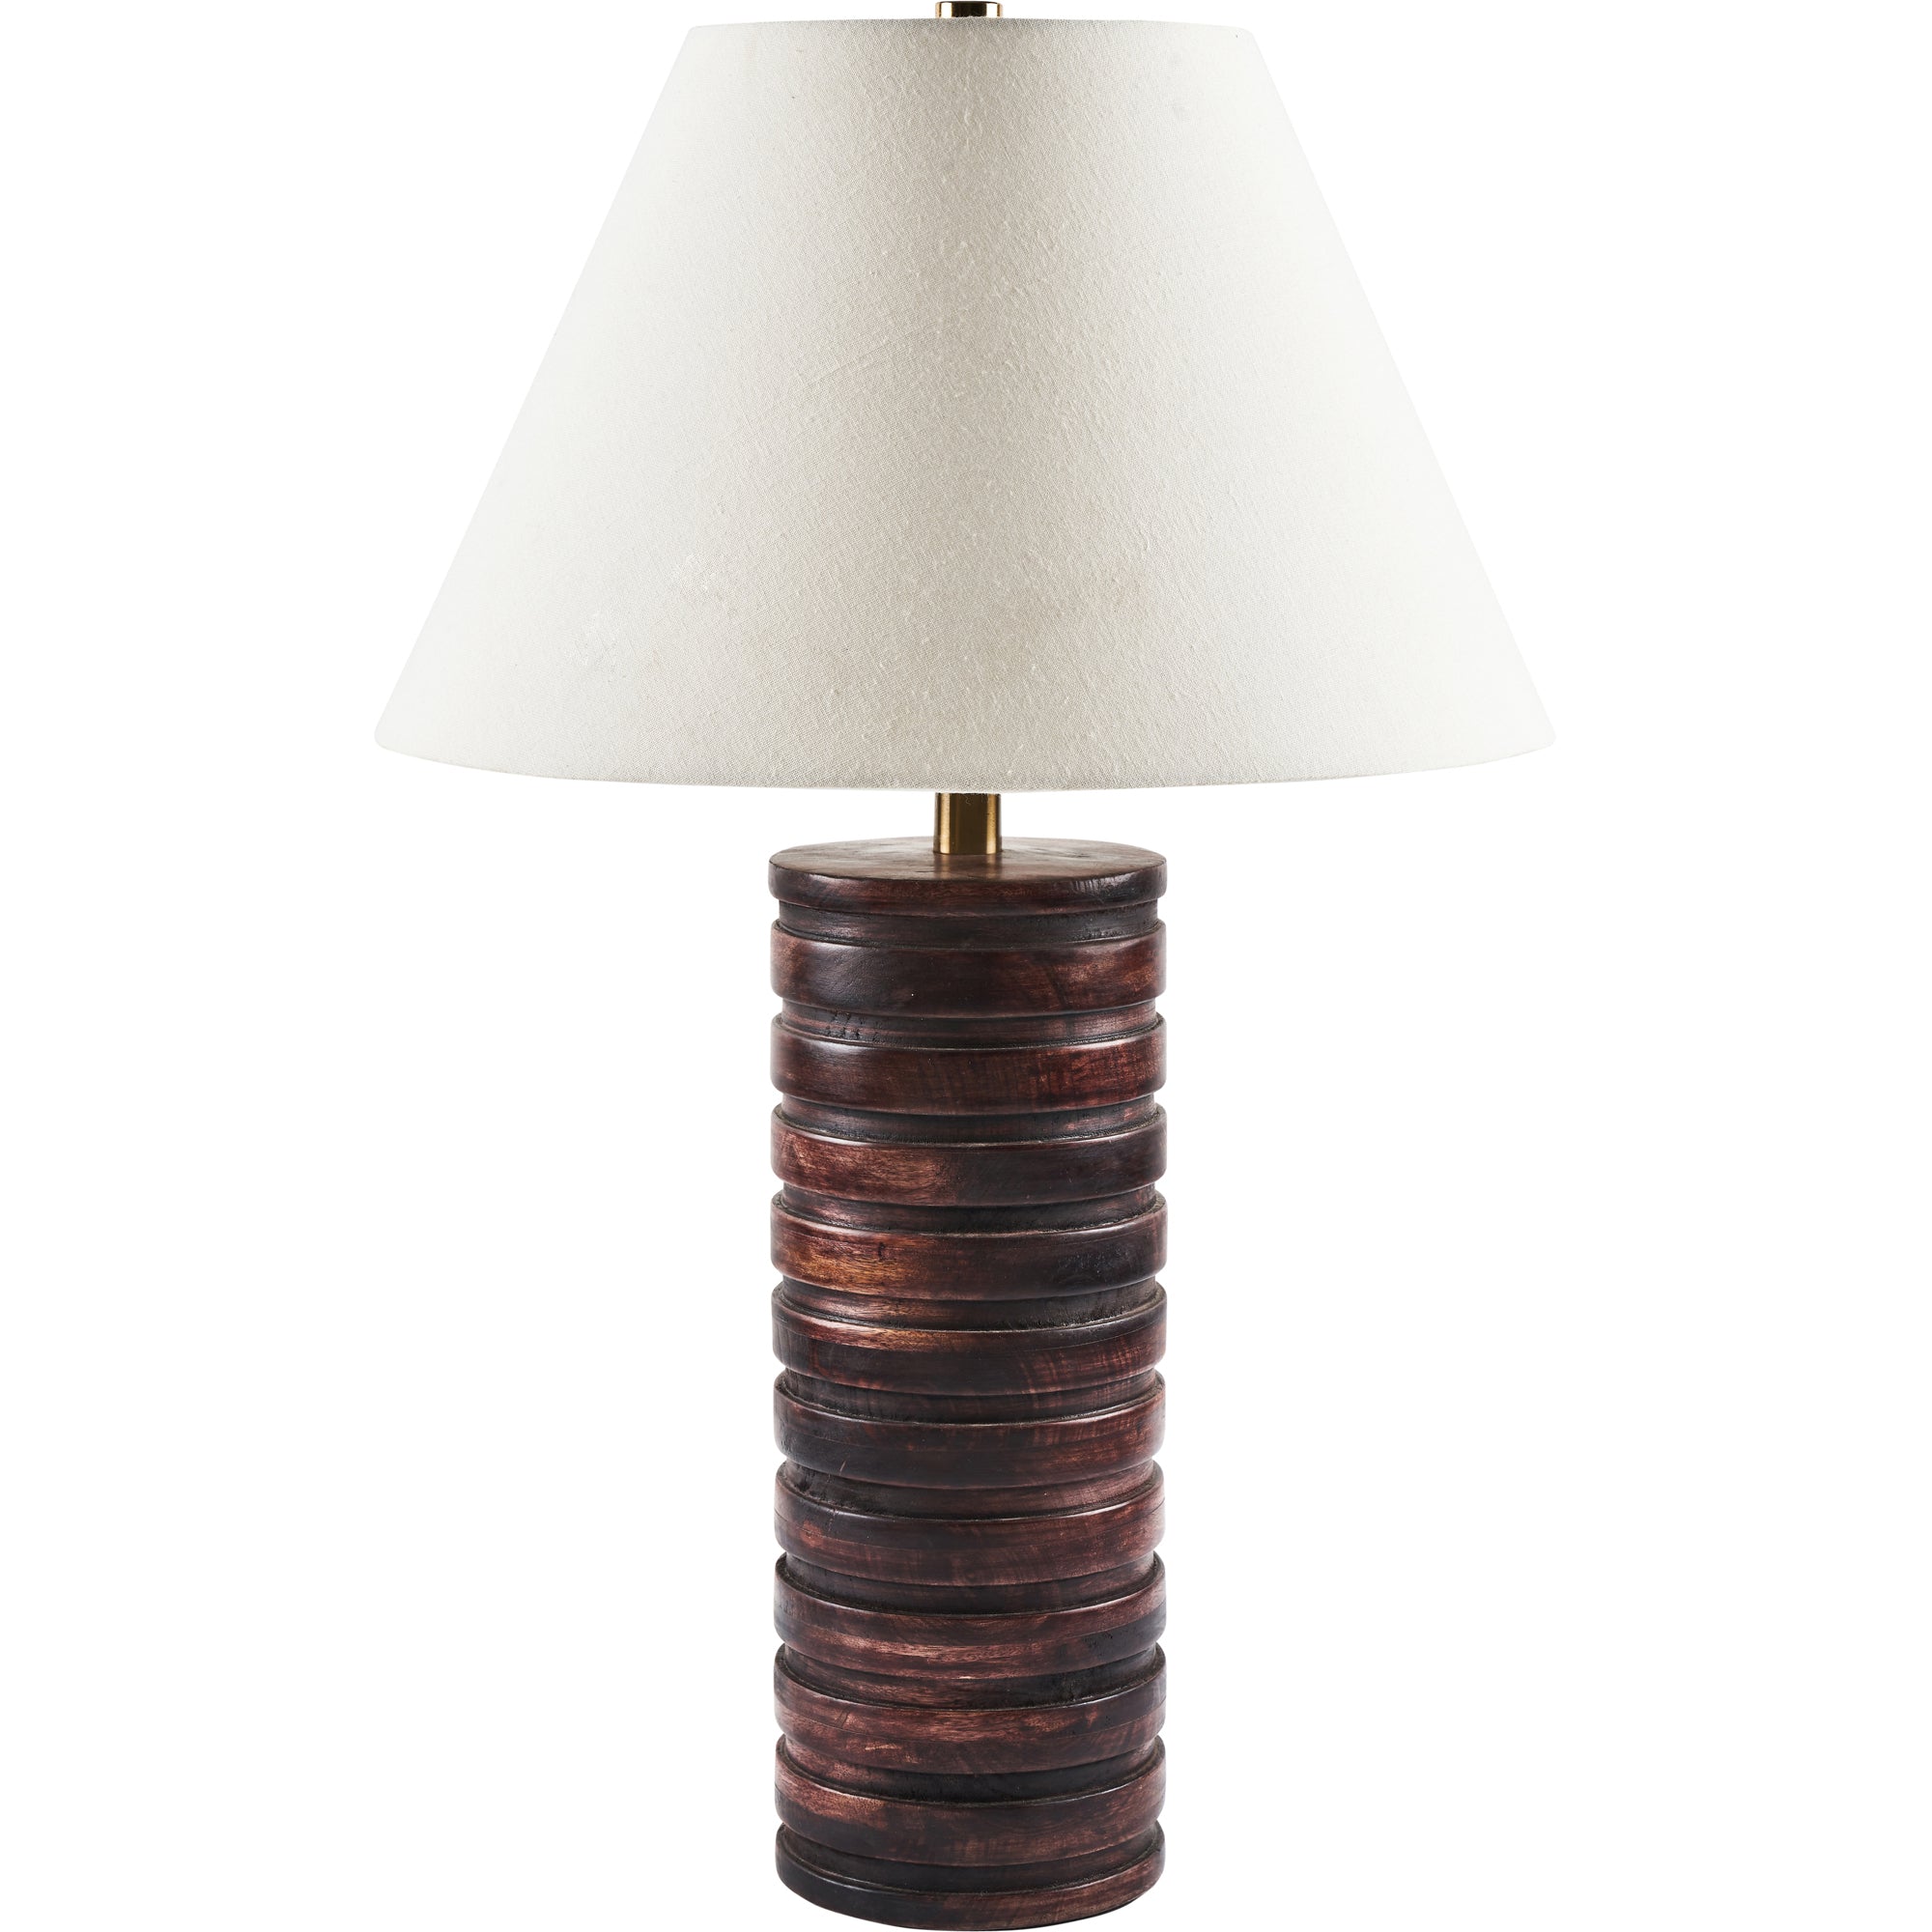 Benny Table Lamp